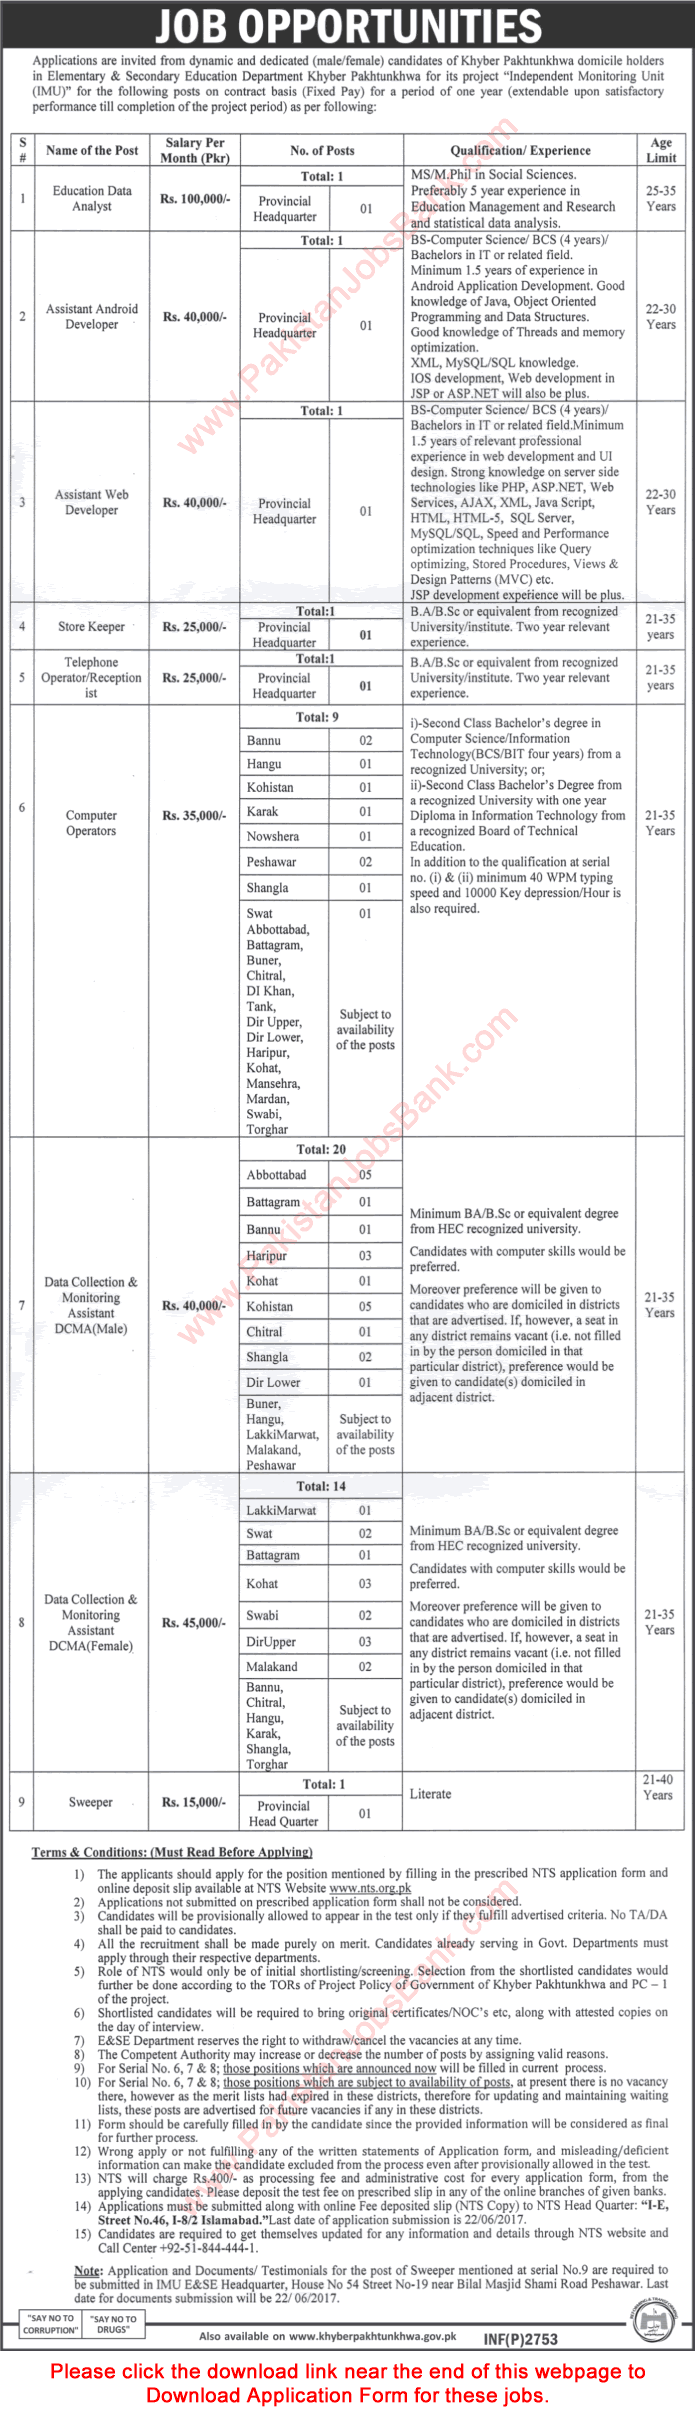 Elementary and Secondary Education Department KPK Jobs June 2017 NTS Application Form Download Latest